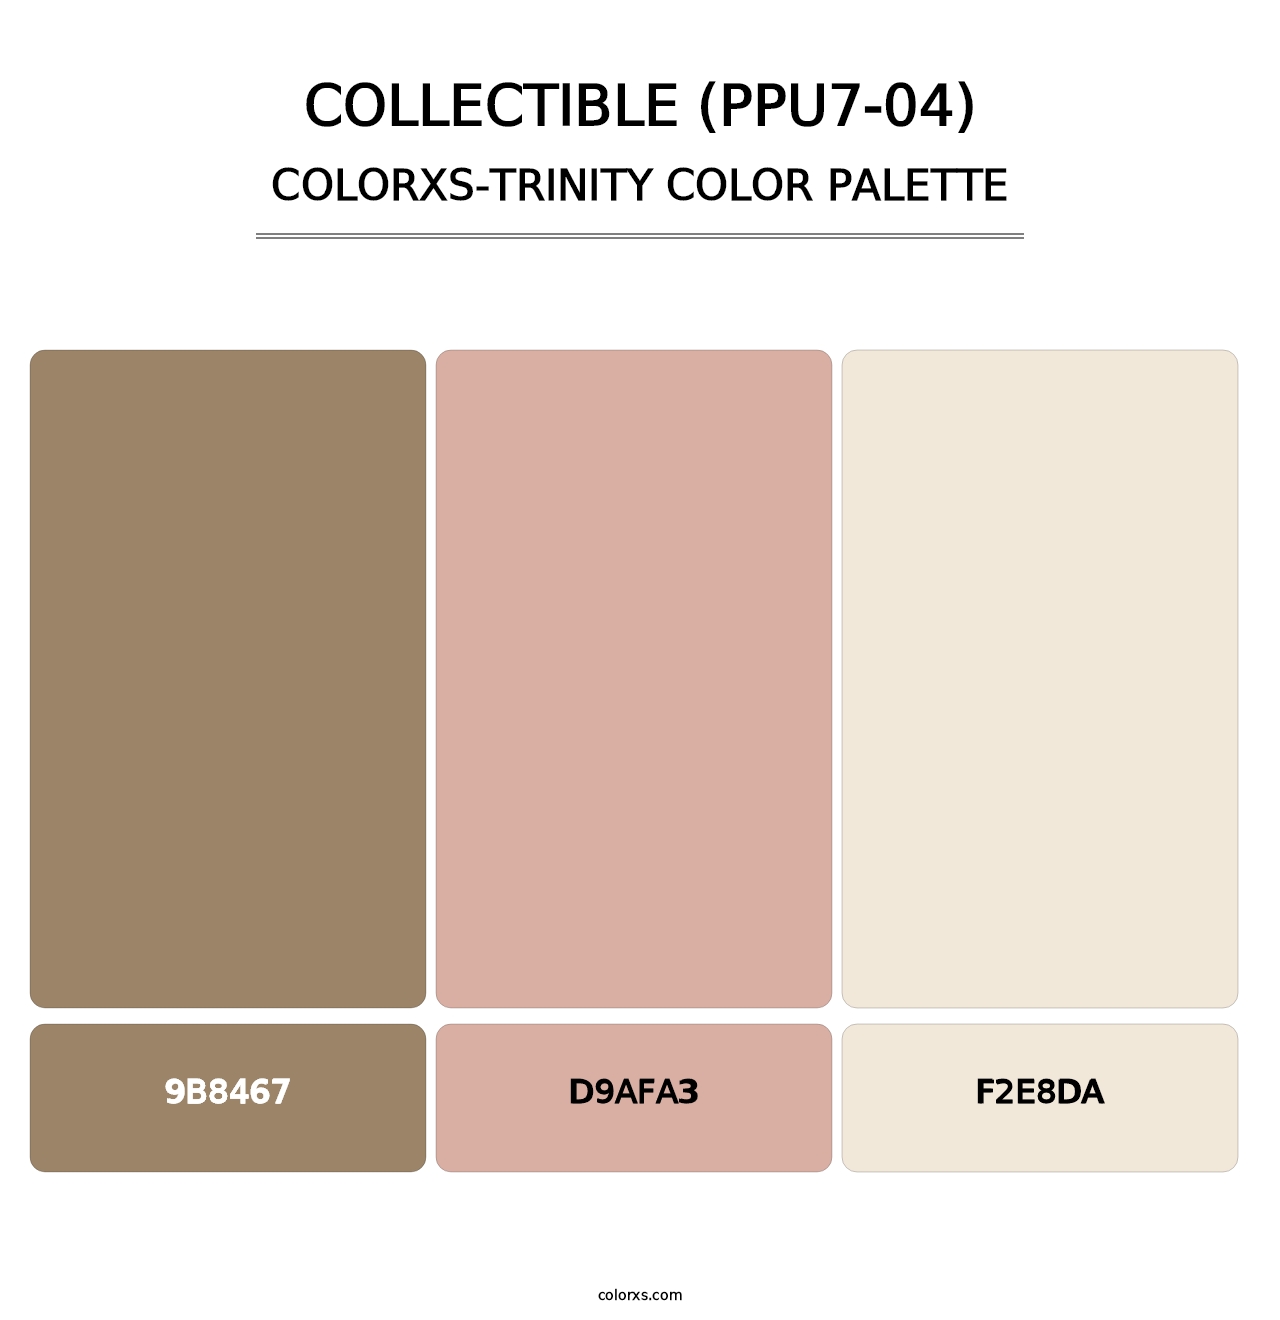 Collectible (PPU7-04) - Colorxs Trinity Palette